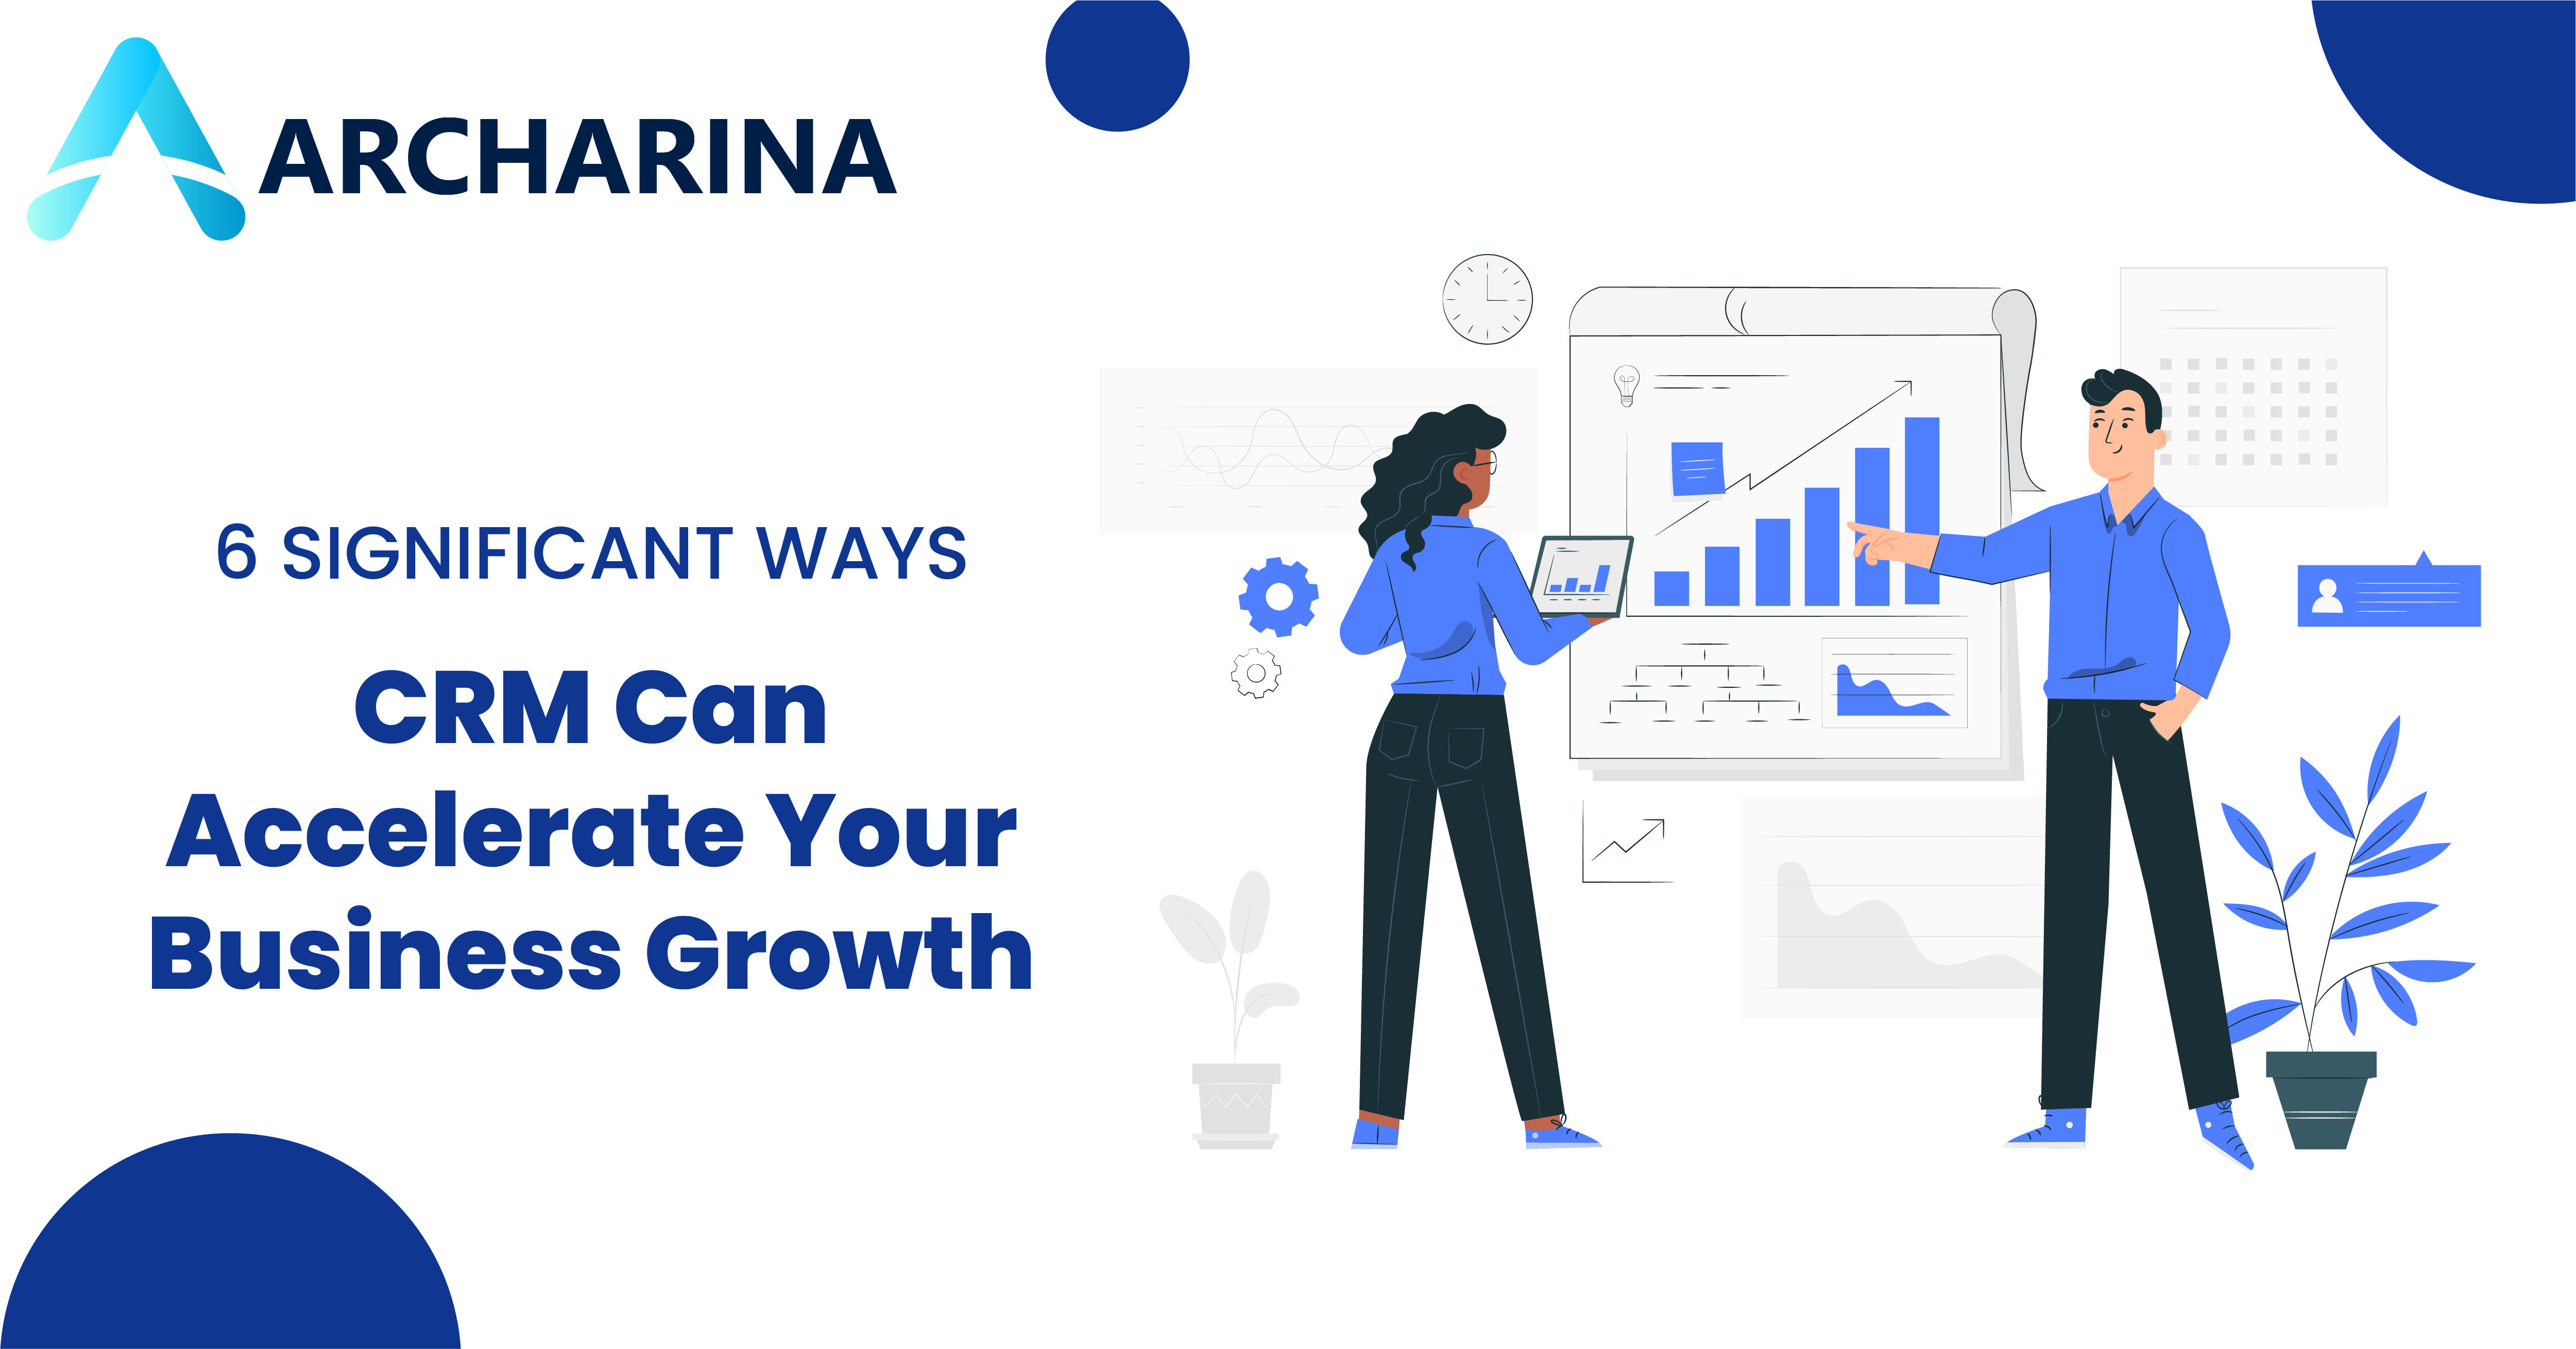 6 Significant Ways CRM Can Accelerate Your Business Growth